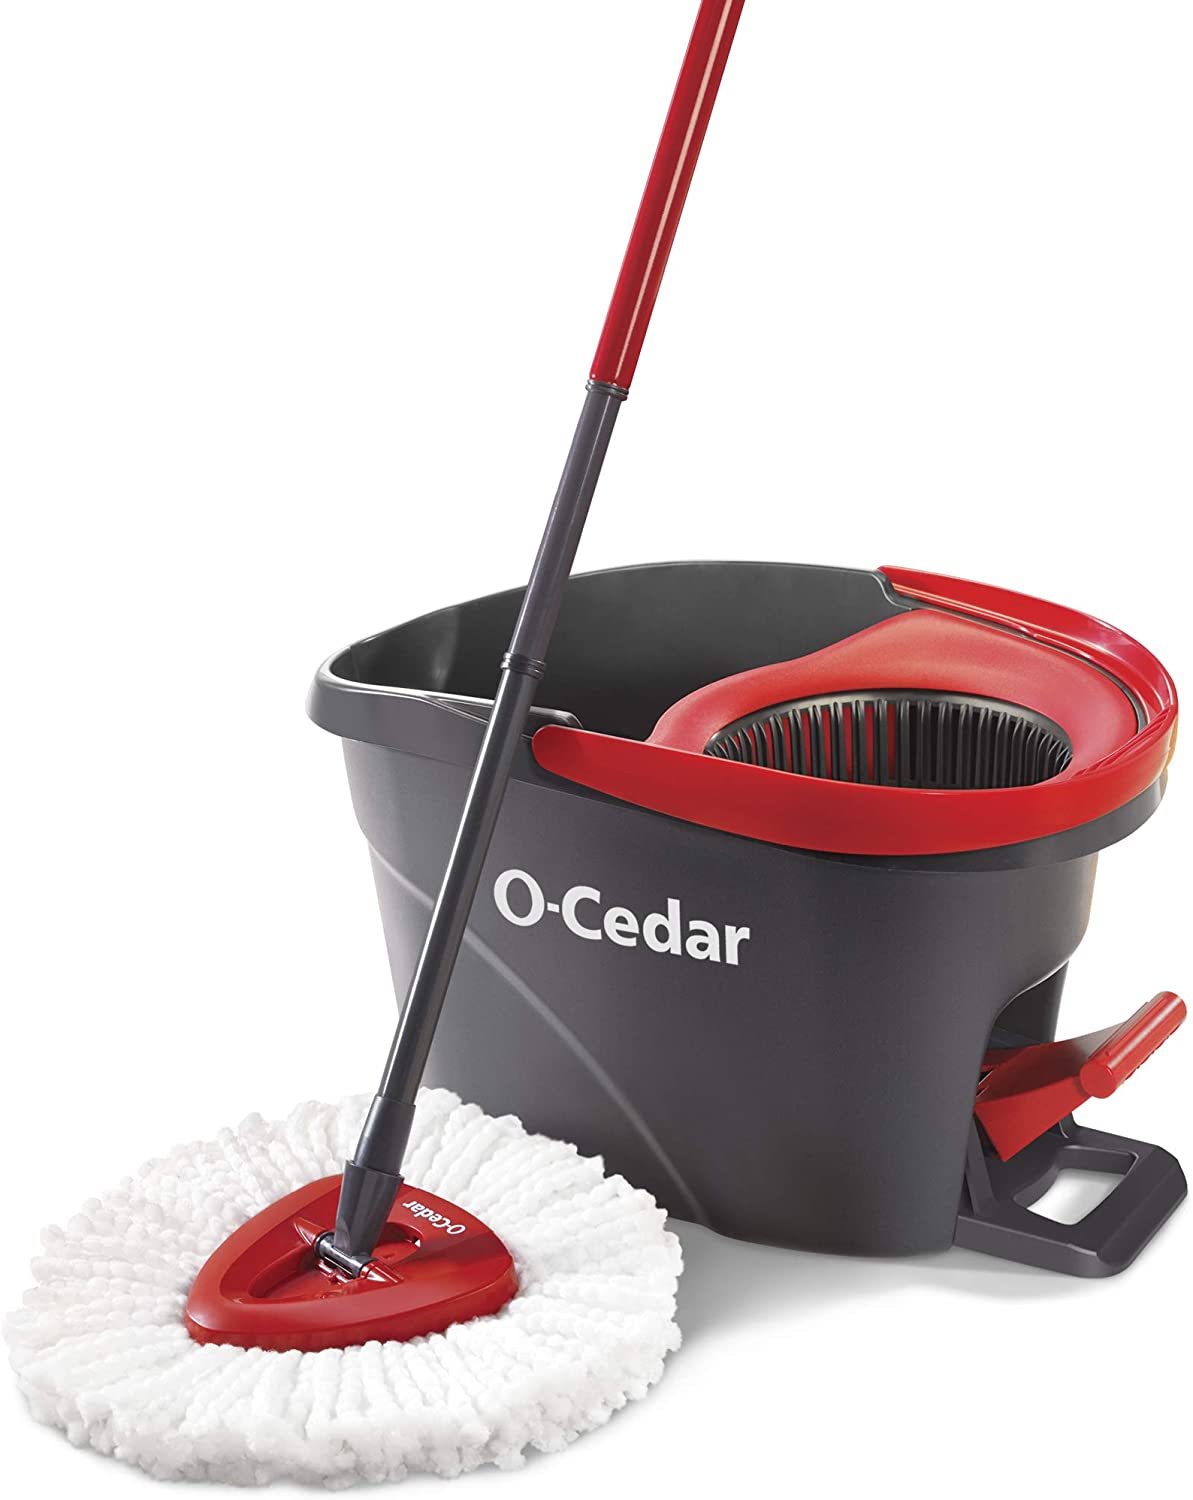 O-Cedar EasyWring Microfiber Spin Mop, Bucket Floor Cleaning System, Red, Gray 57